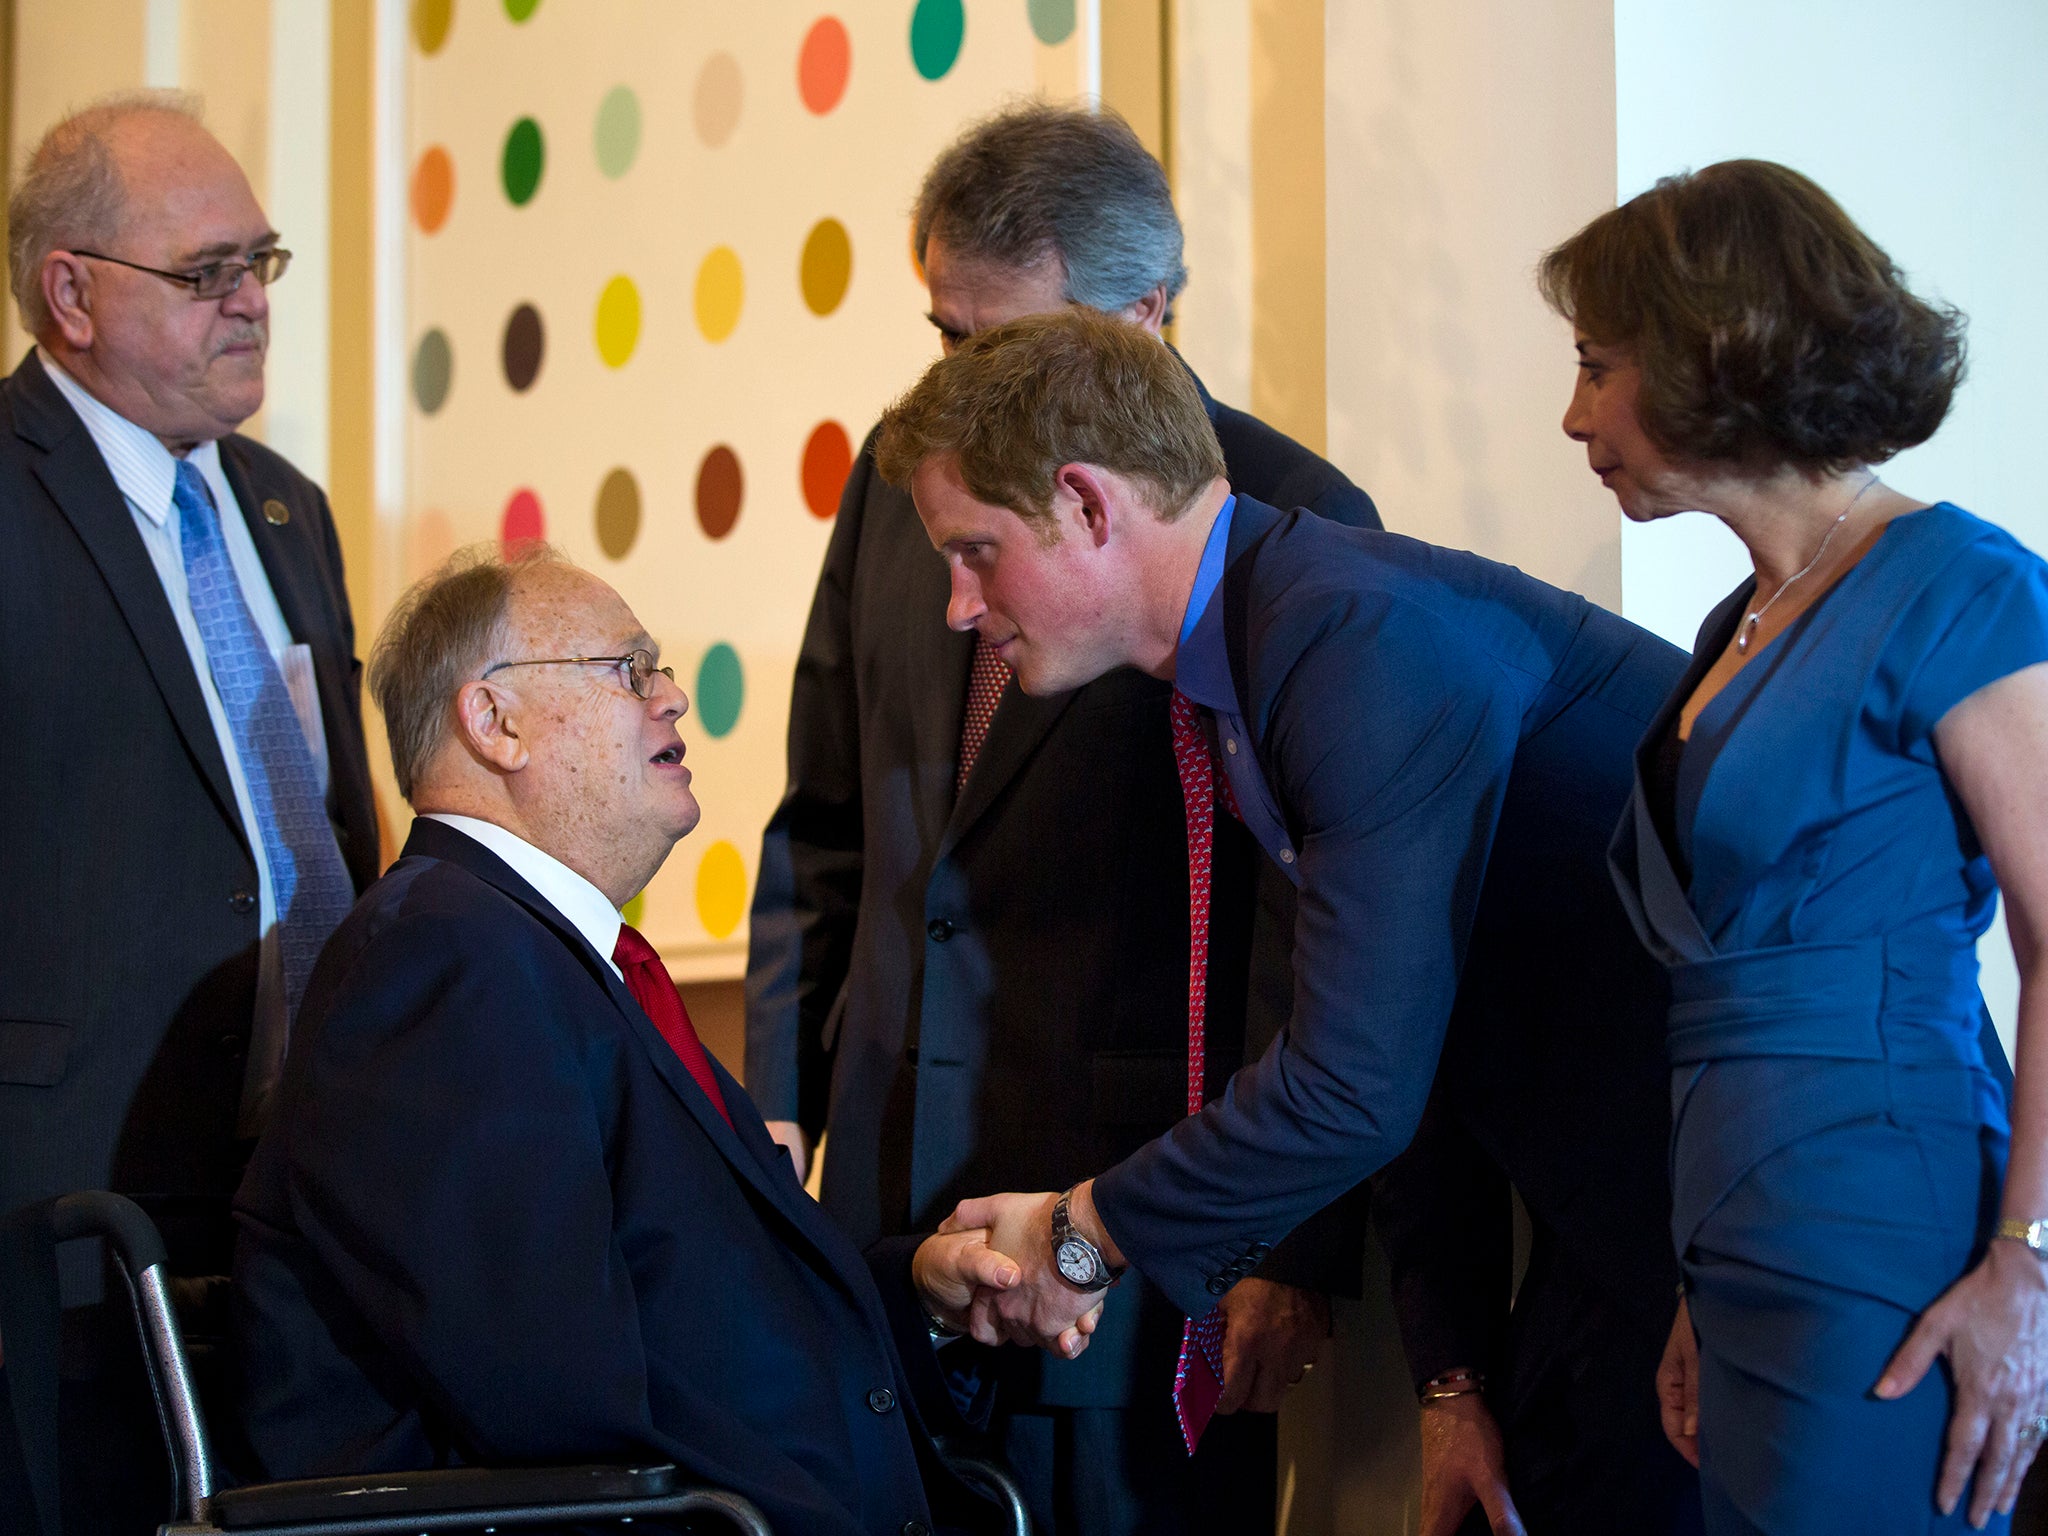 Meeting Prince Harry at a dinner at the British ambassador’s Washington residence in 2013